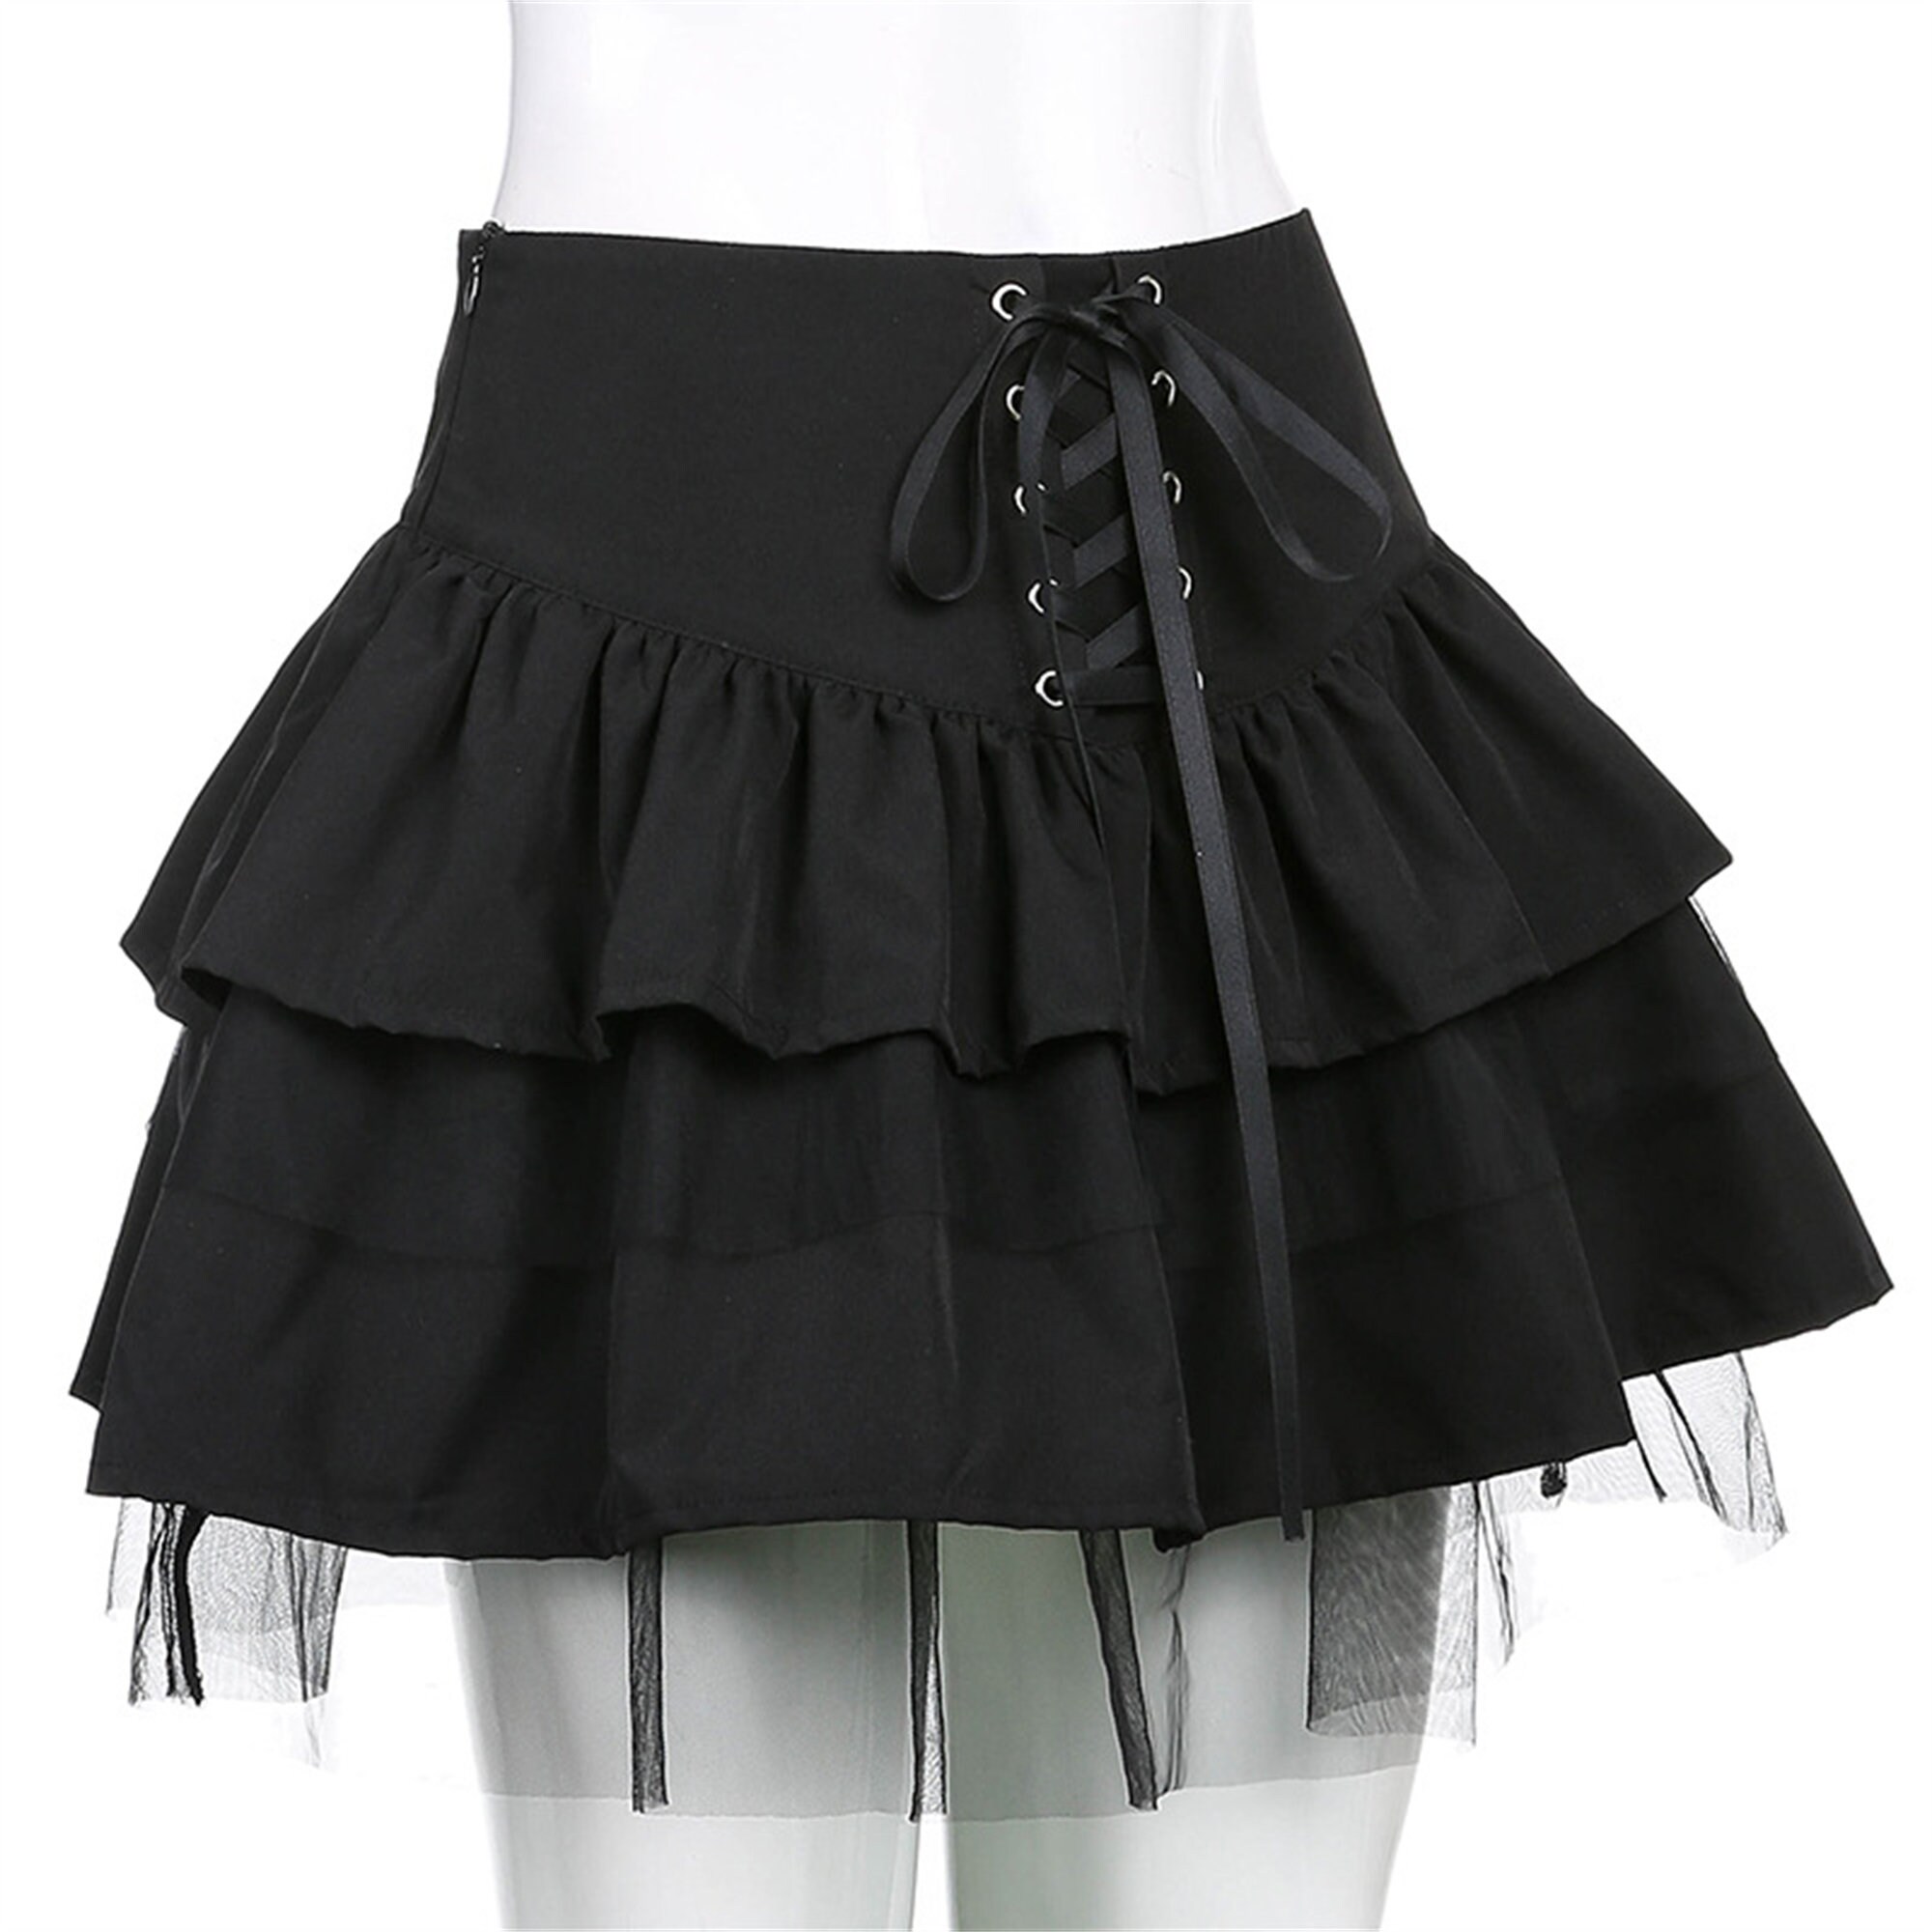 Y2k Dark Lace Pleated Skirt Gothic Patchwork Mesh Skirt Vintage Layered Black Skirt Casual College Style Punk High Waist Mini Skirt